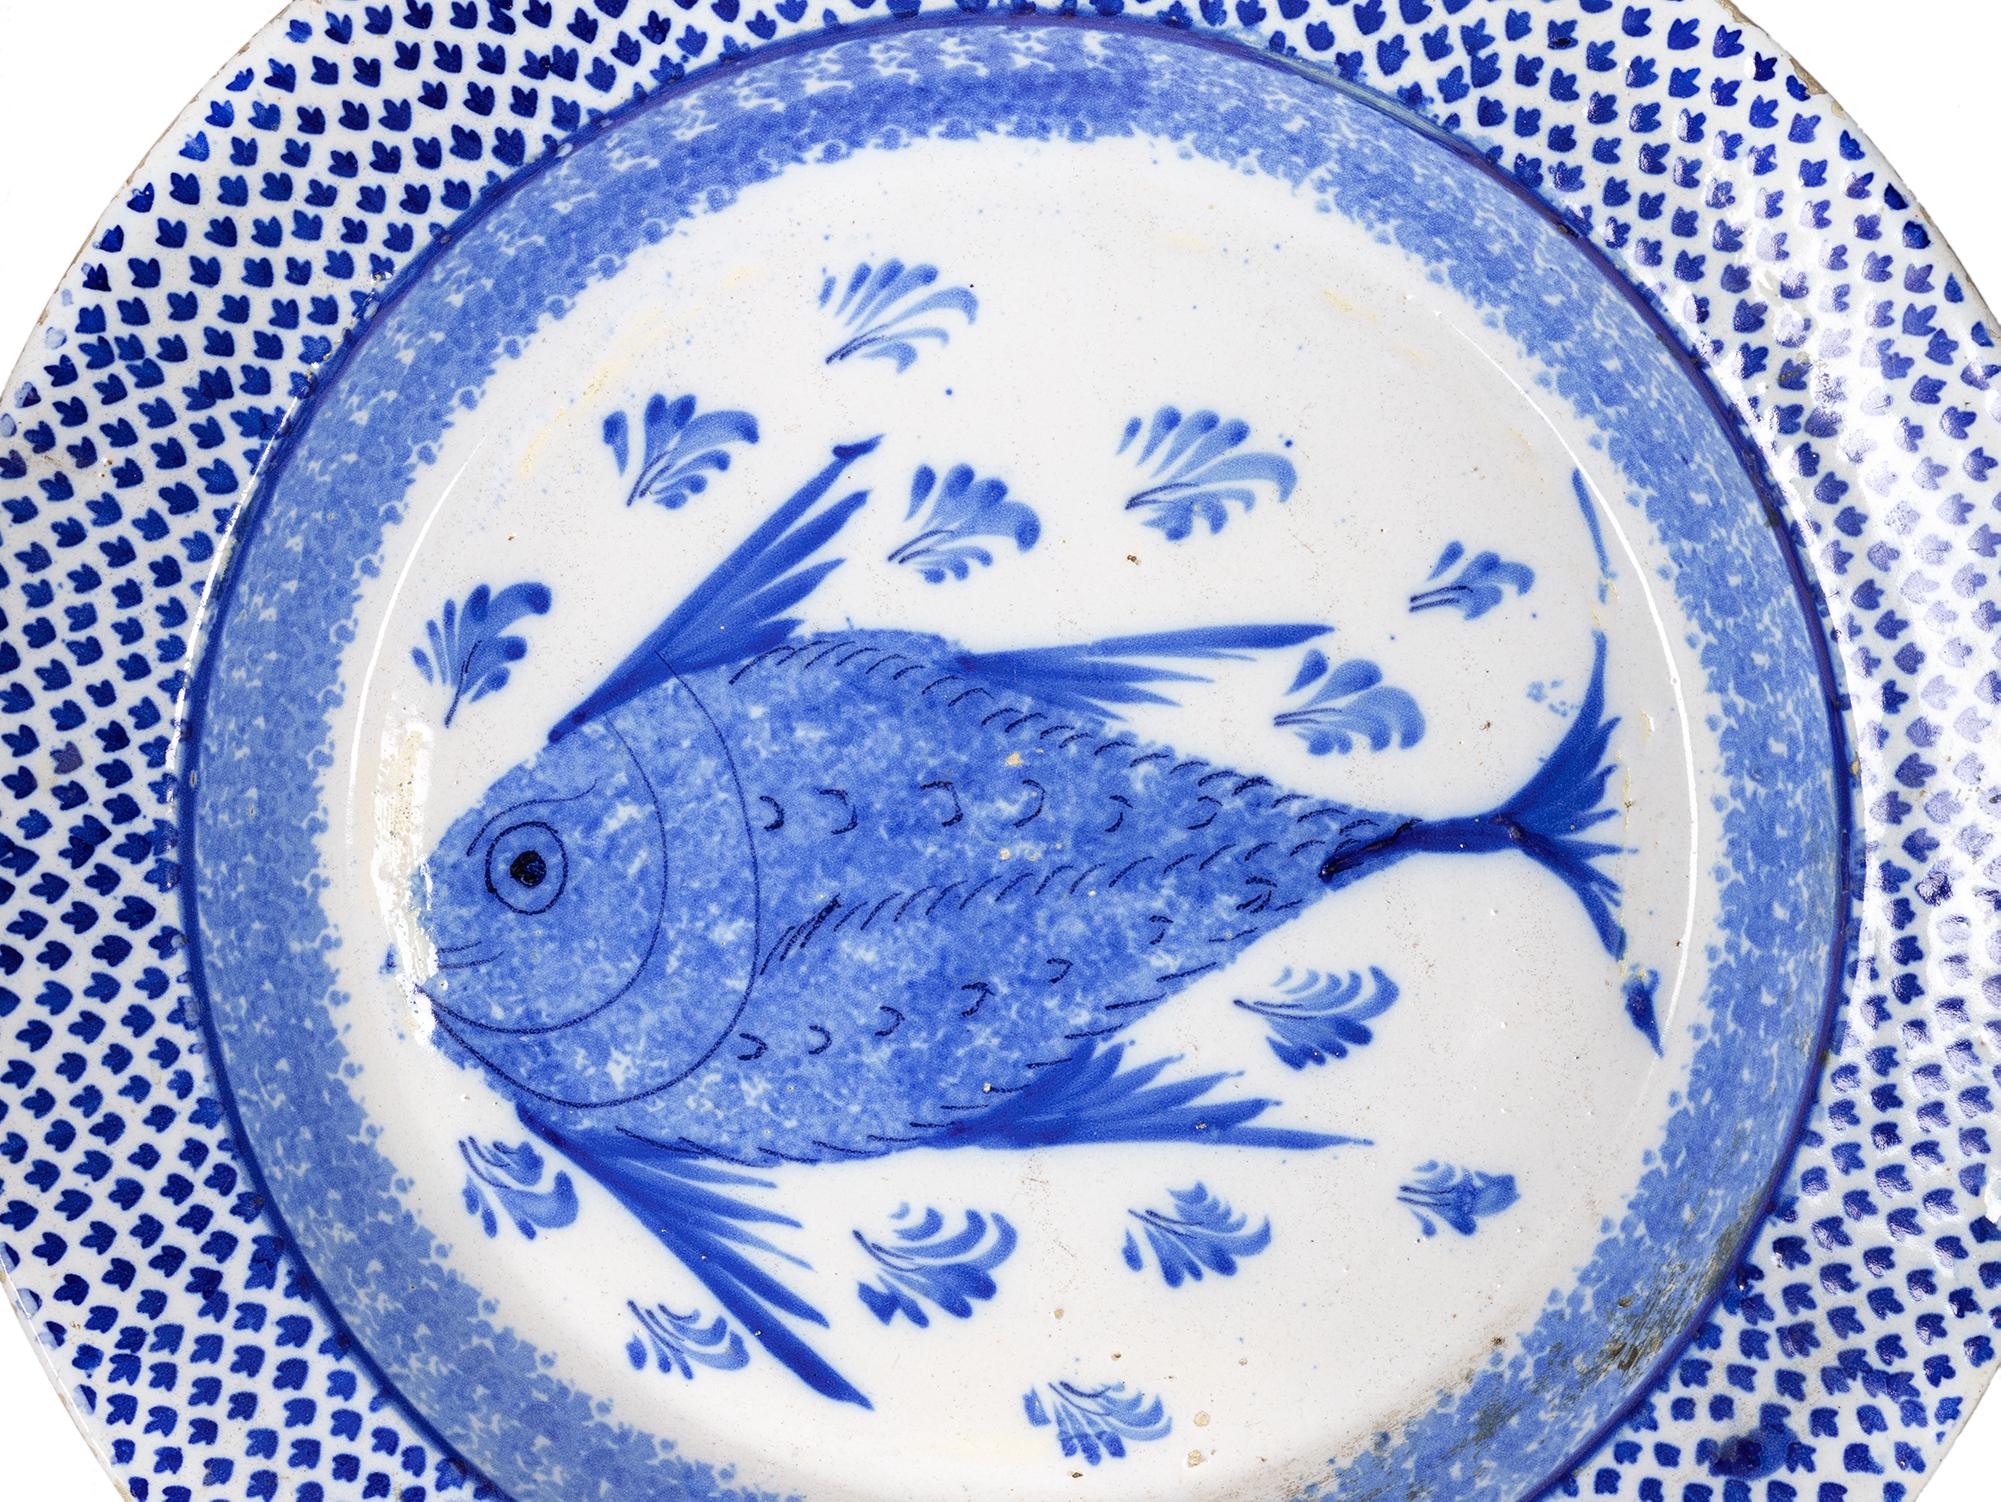 A chinese export large porcelain rounded edges platter with a blue fish in the center.
